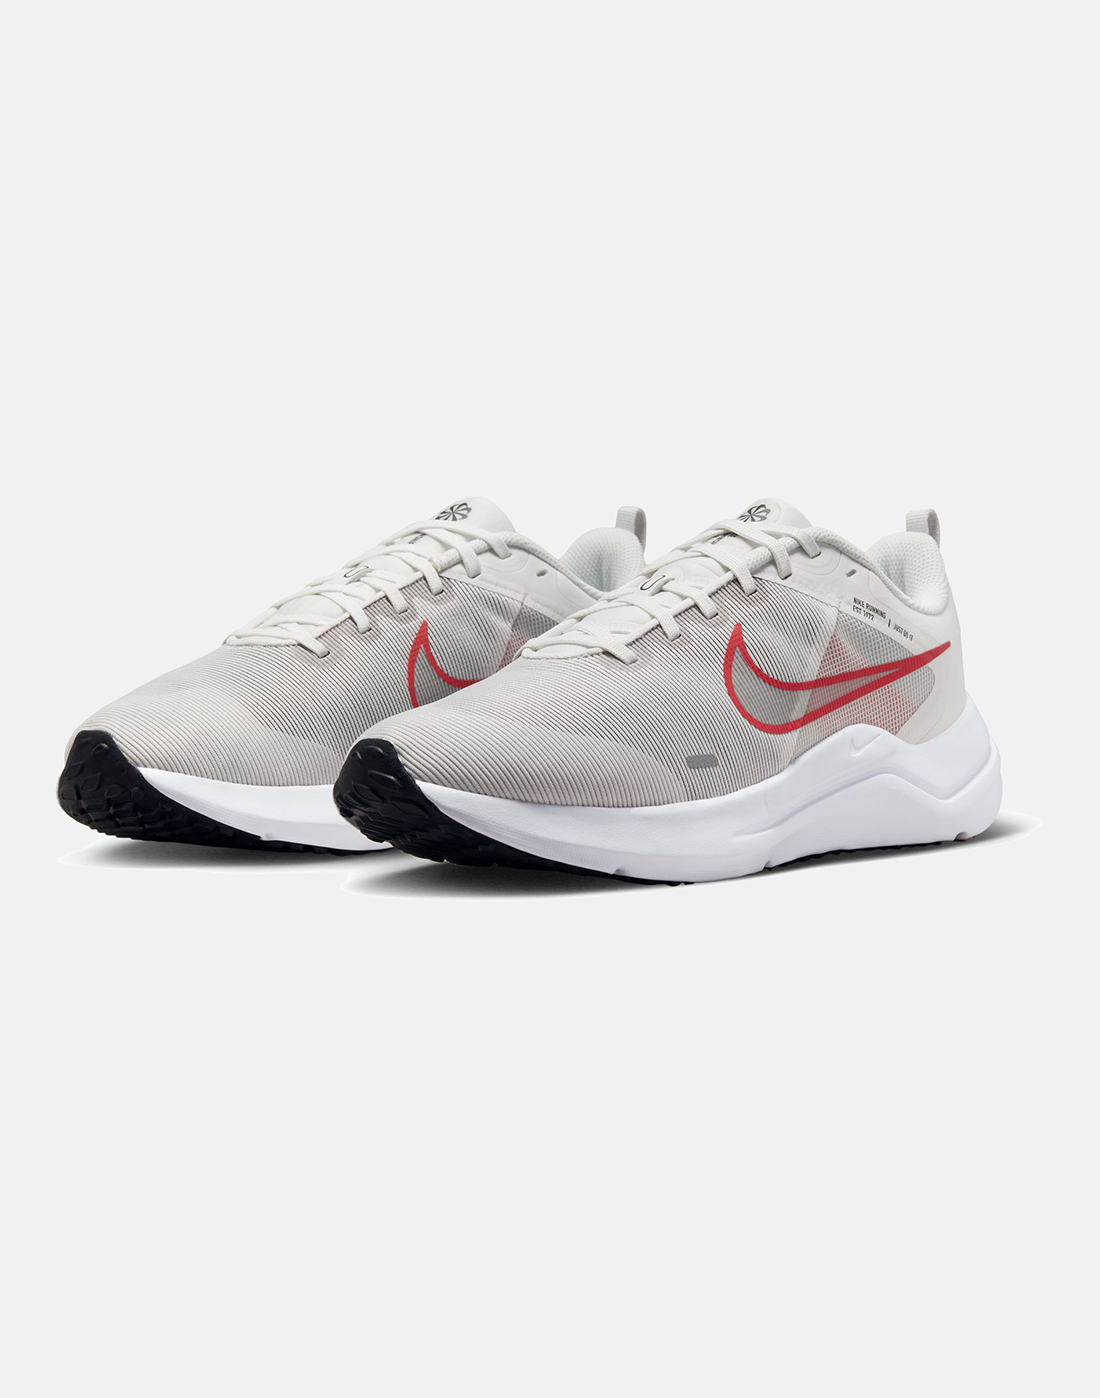 Nike Mens Downshifter 12 - Cream | Life Style Sports IE